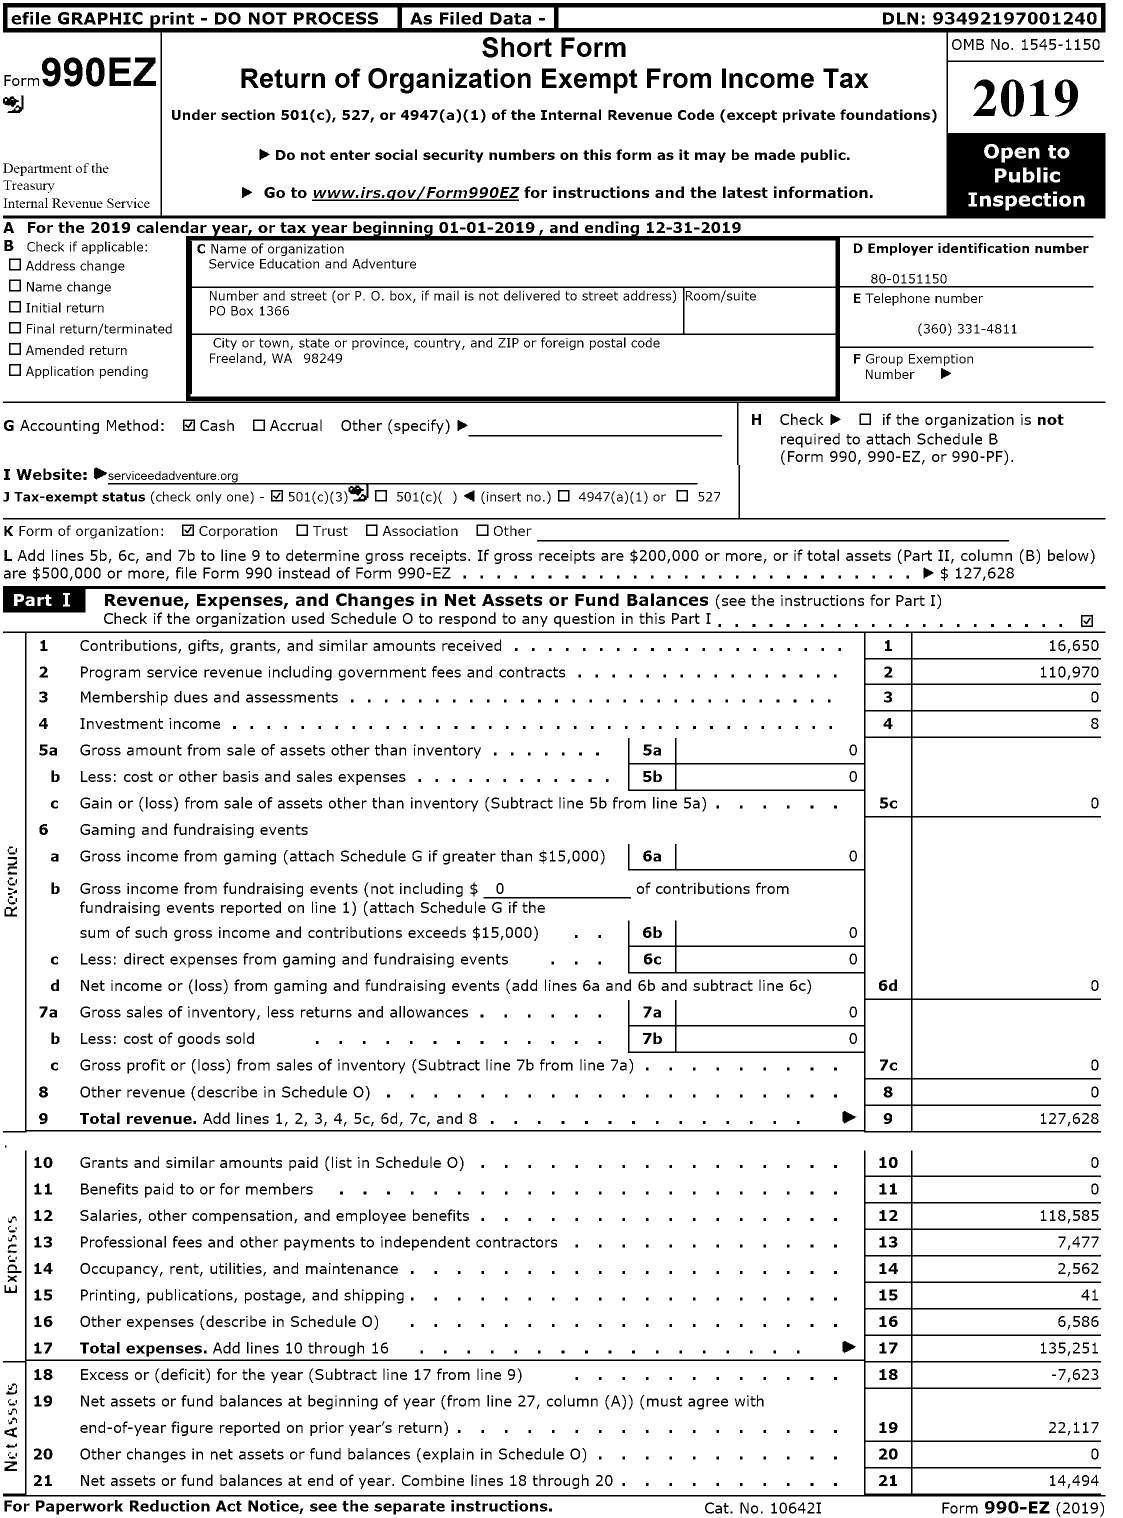 Image of first page of 2019 Form 990EZ for Service Education and Adventure (SEA)